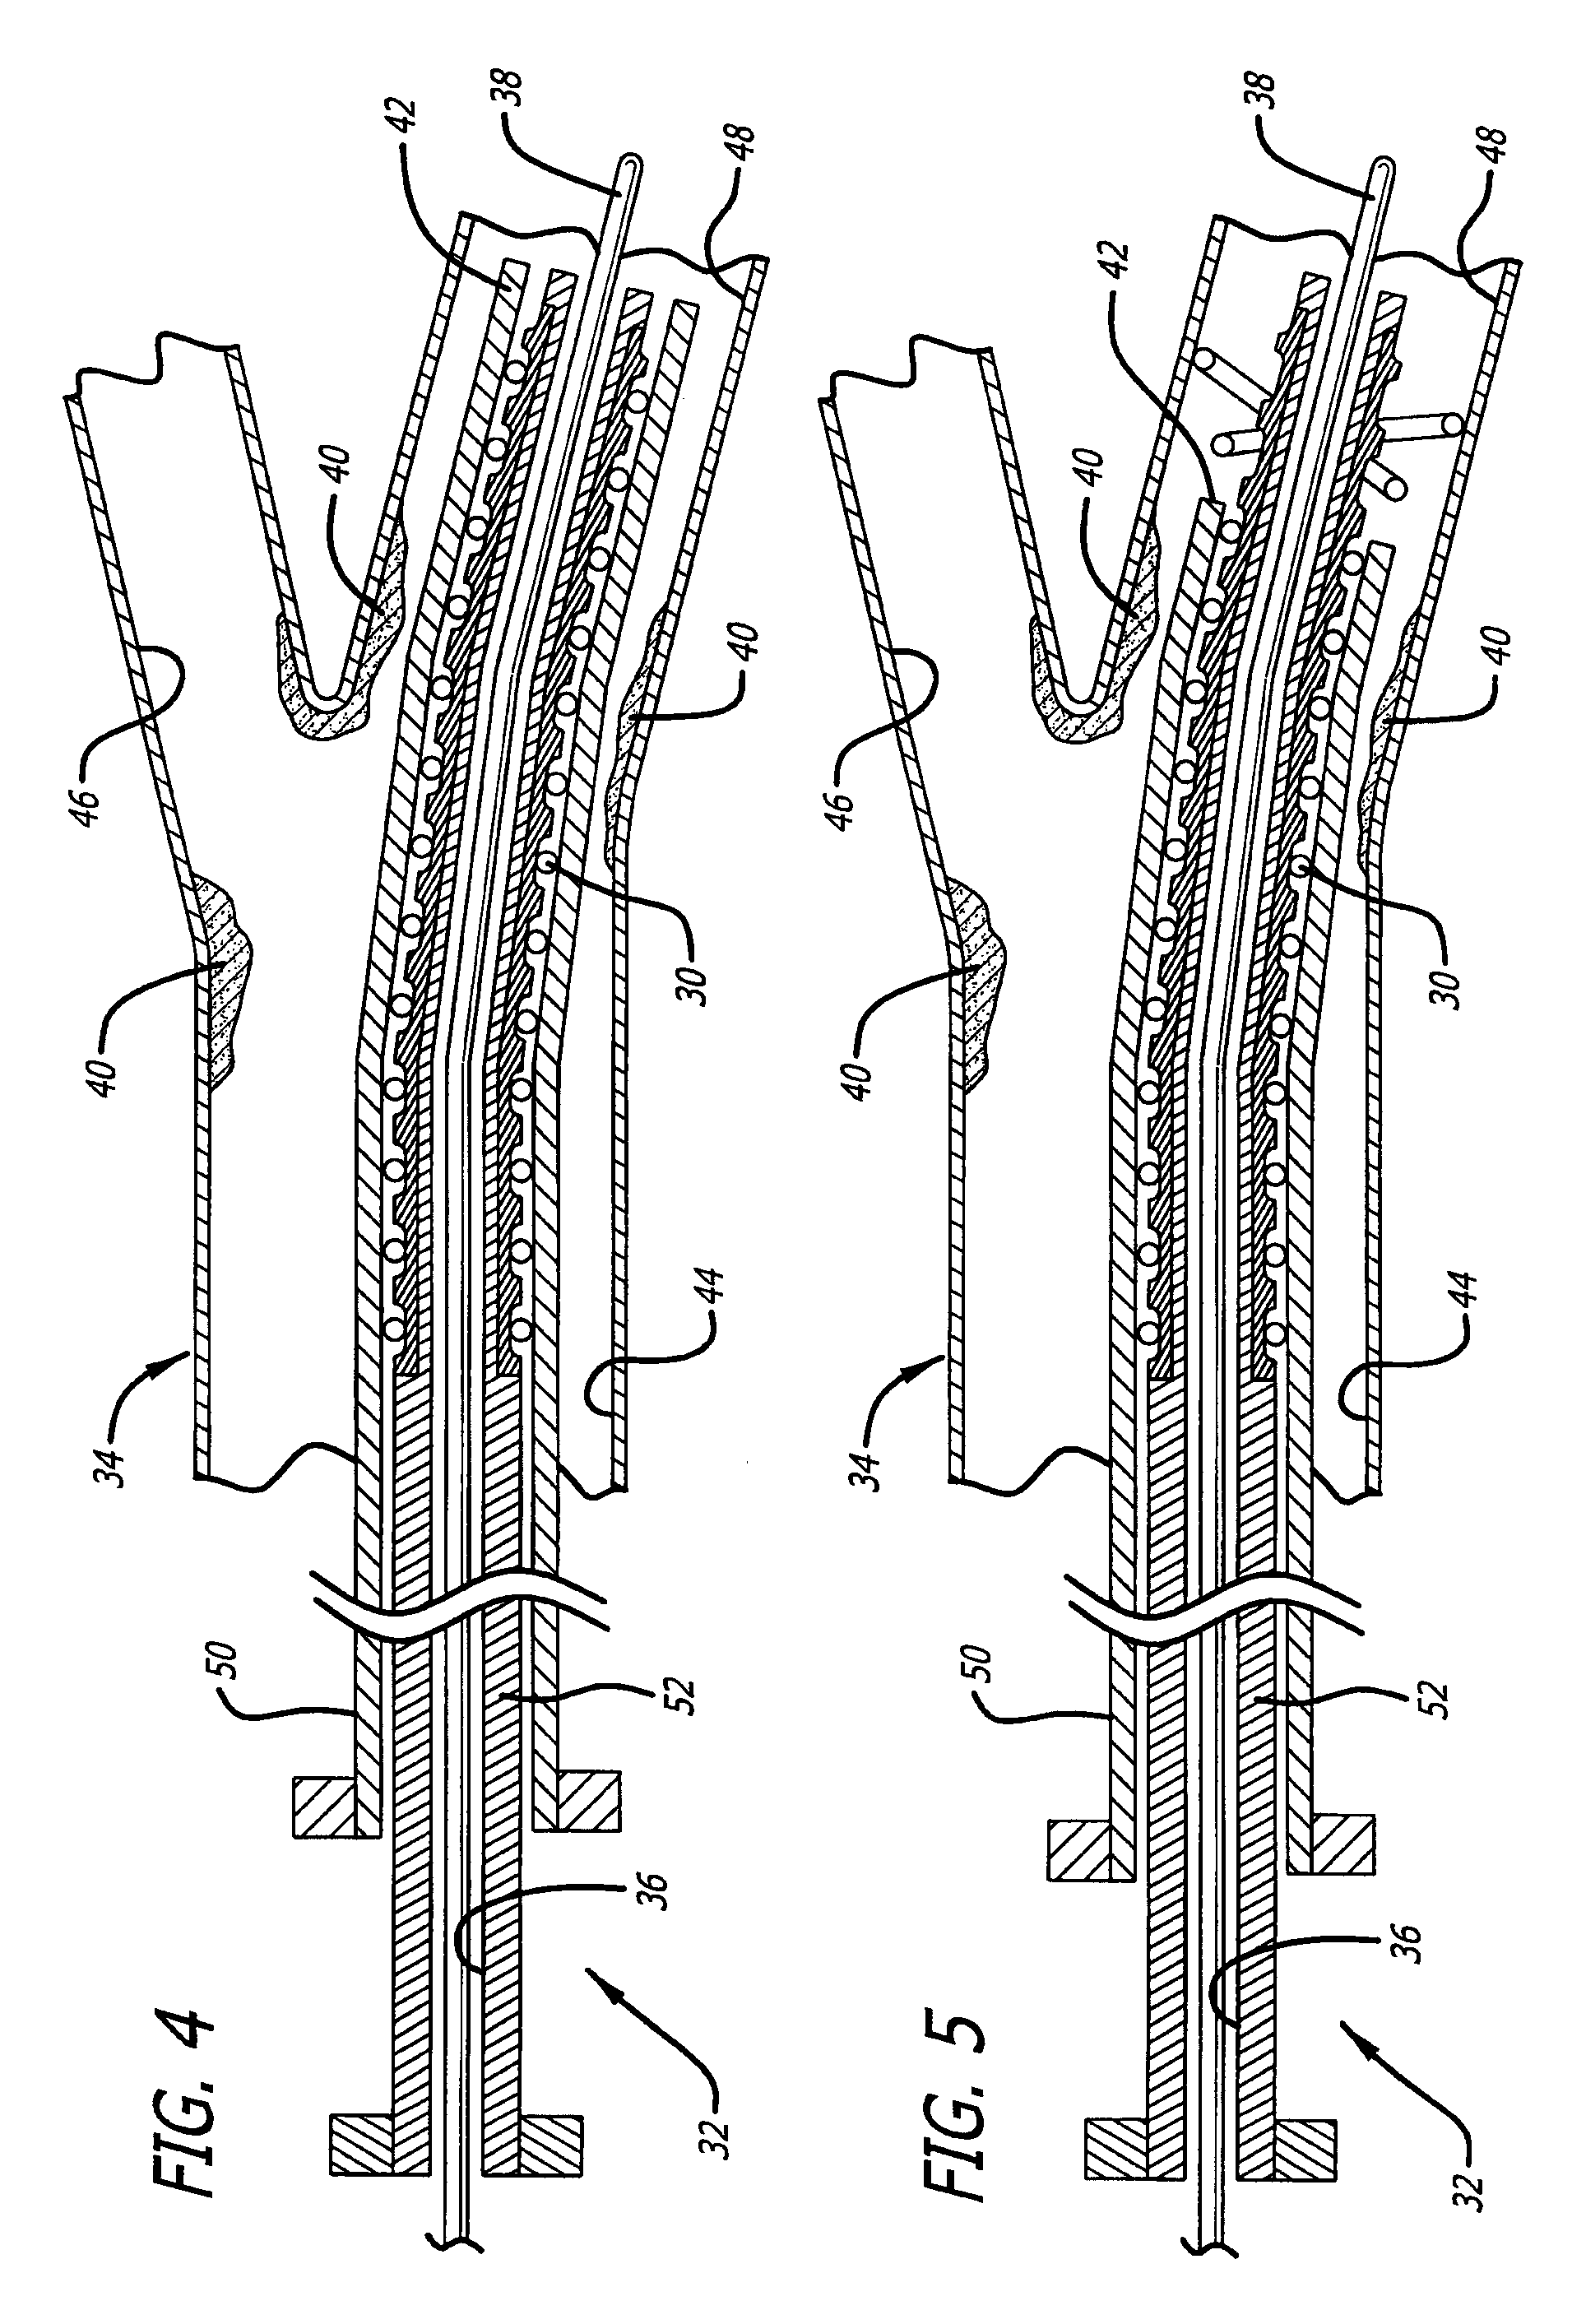 Variable stiffness medical devices